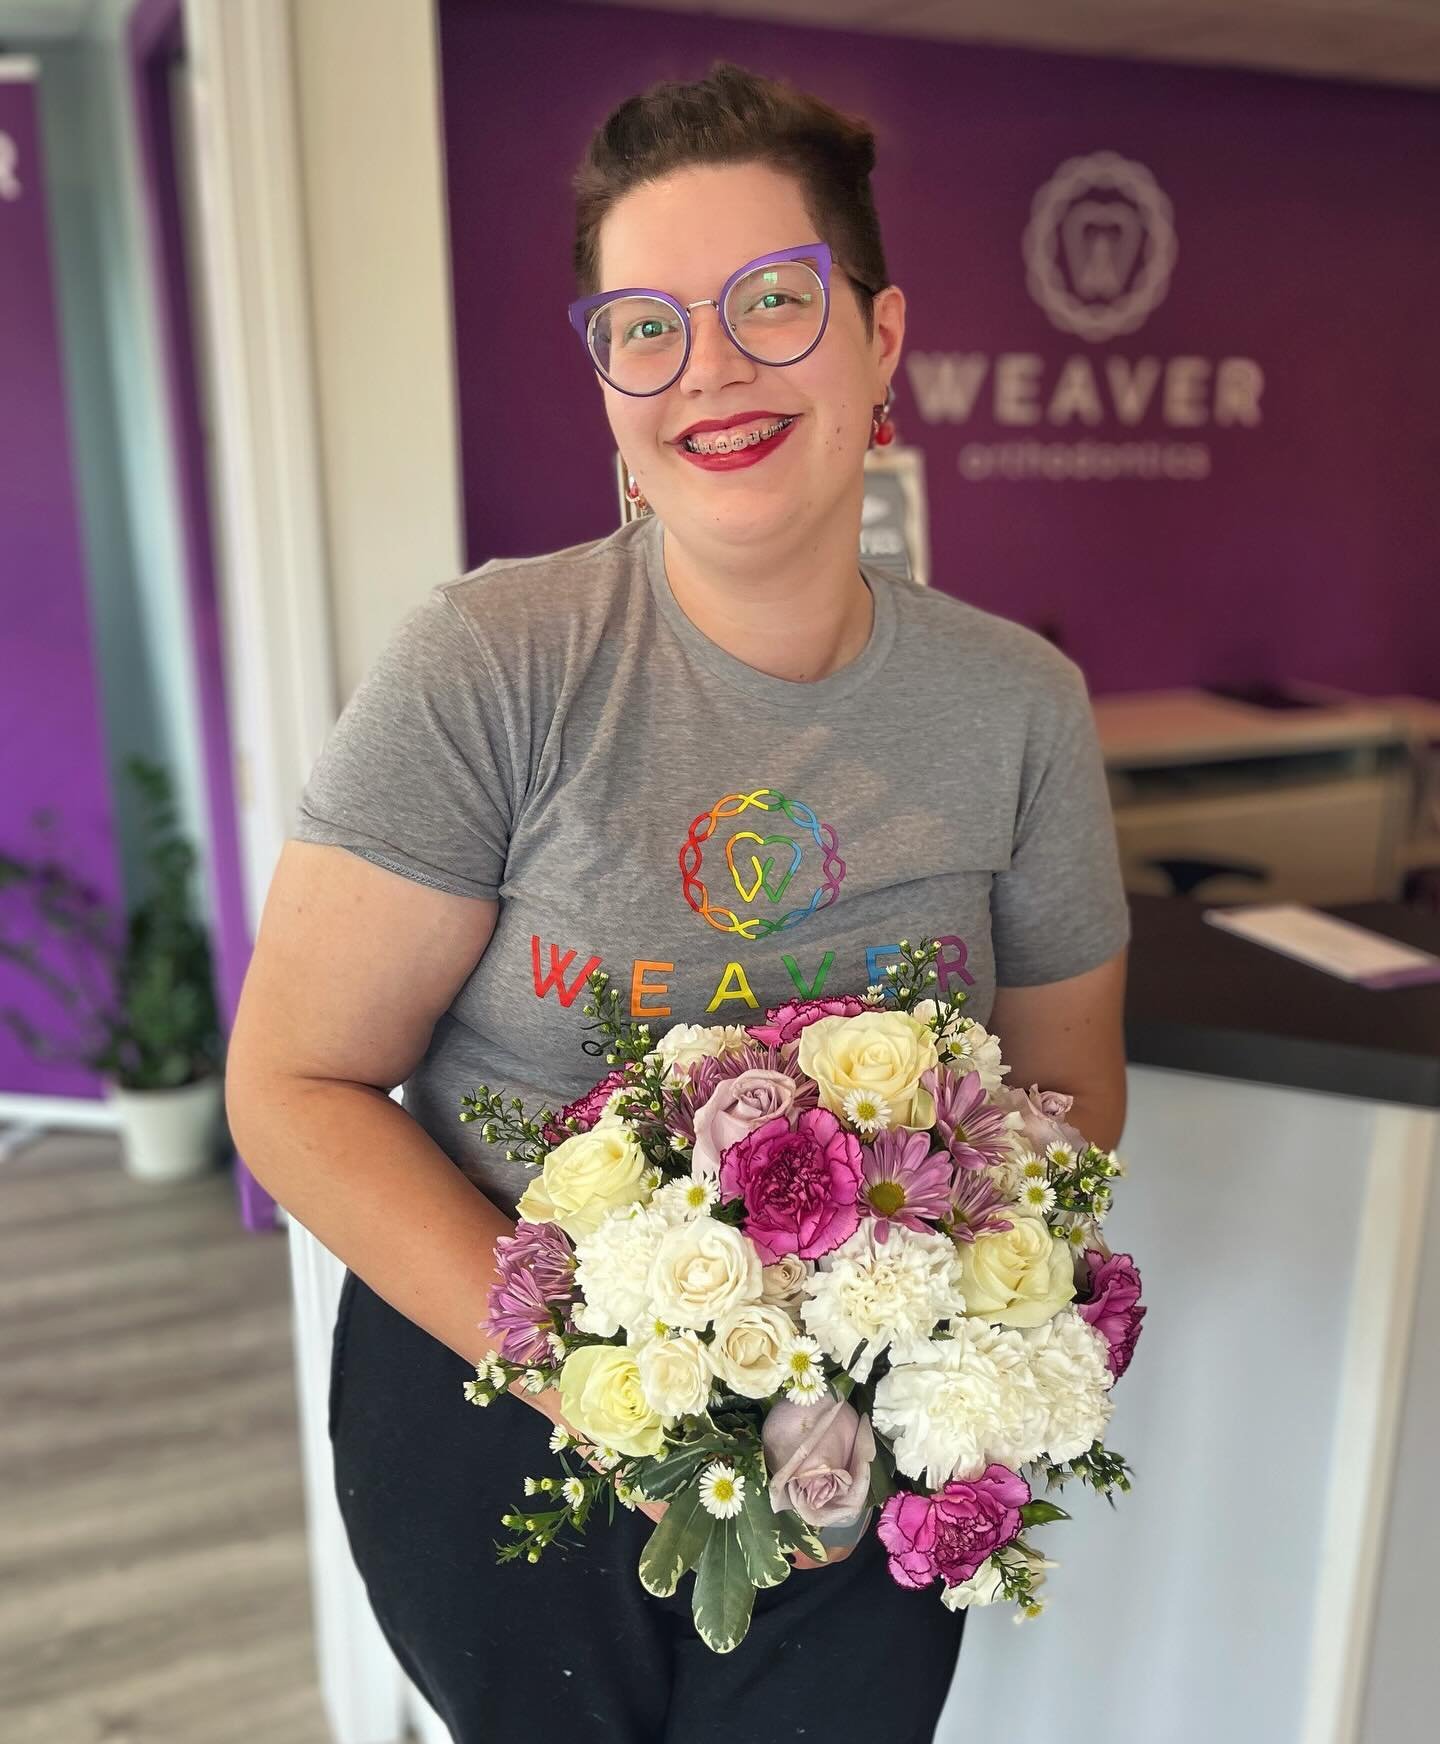 Happy 3️⃣ year work anniversary to Ms. Megan! 💕 Every day is full of wonderful smiles and unending humor that we could not live without! Happy work-aversary! #smile #bestteam #happy #weaverortho #workanniversary #braces #invisalign